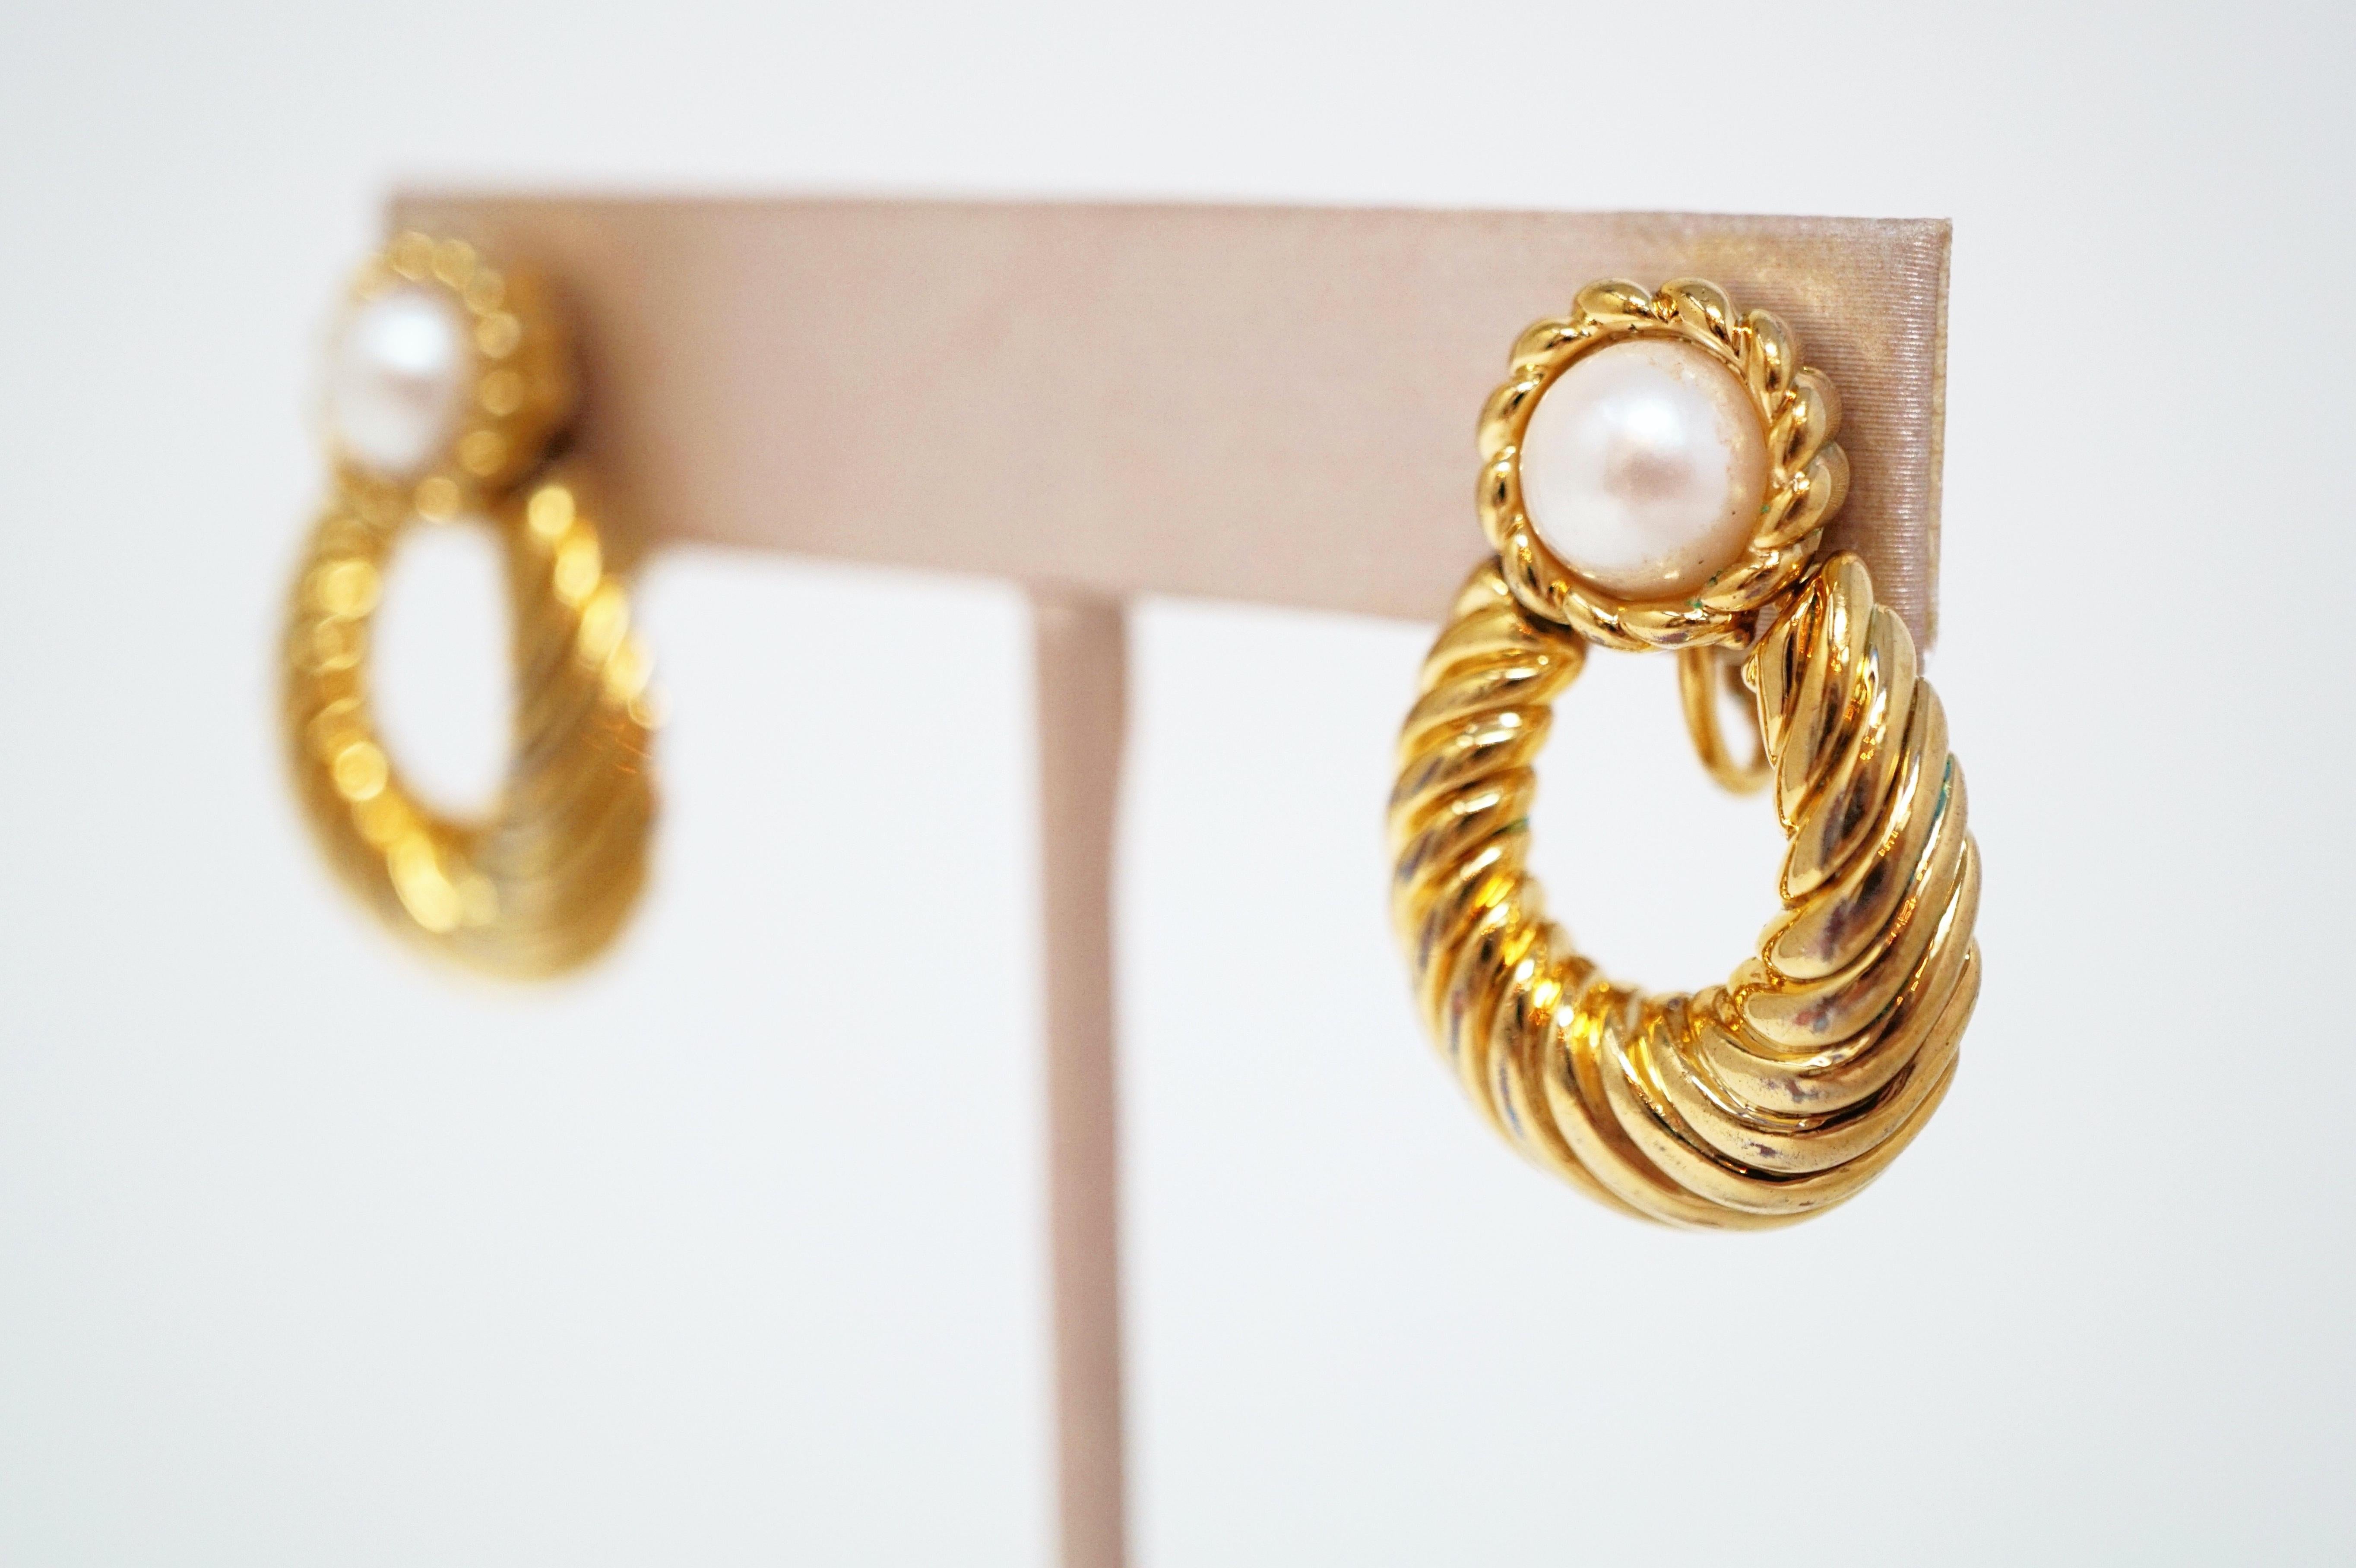 Vintage Napier Gilded Door Knocker Earrings with Pearl, Signed For 